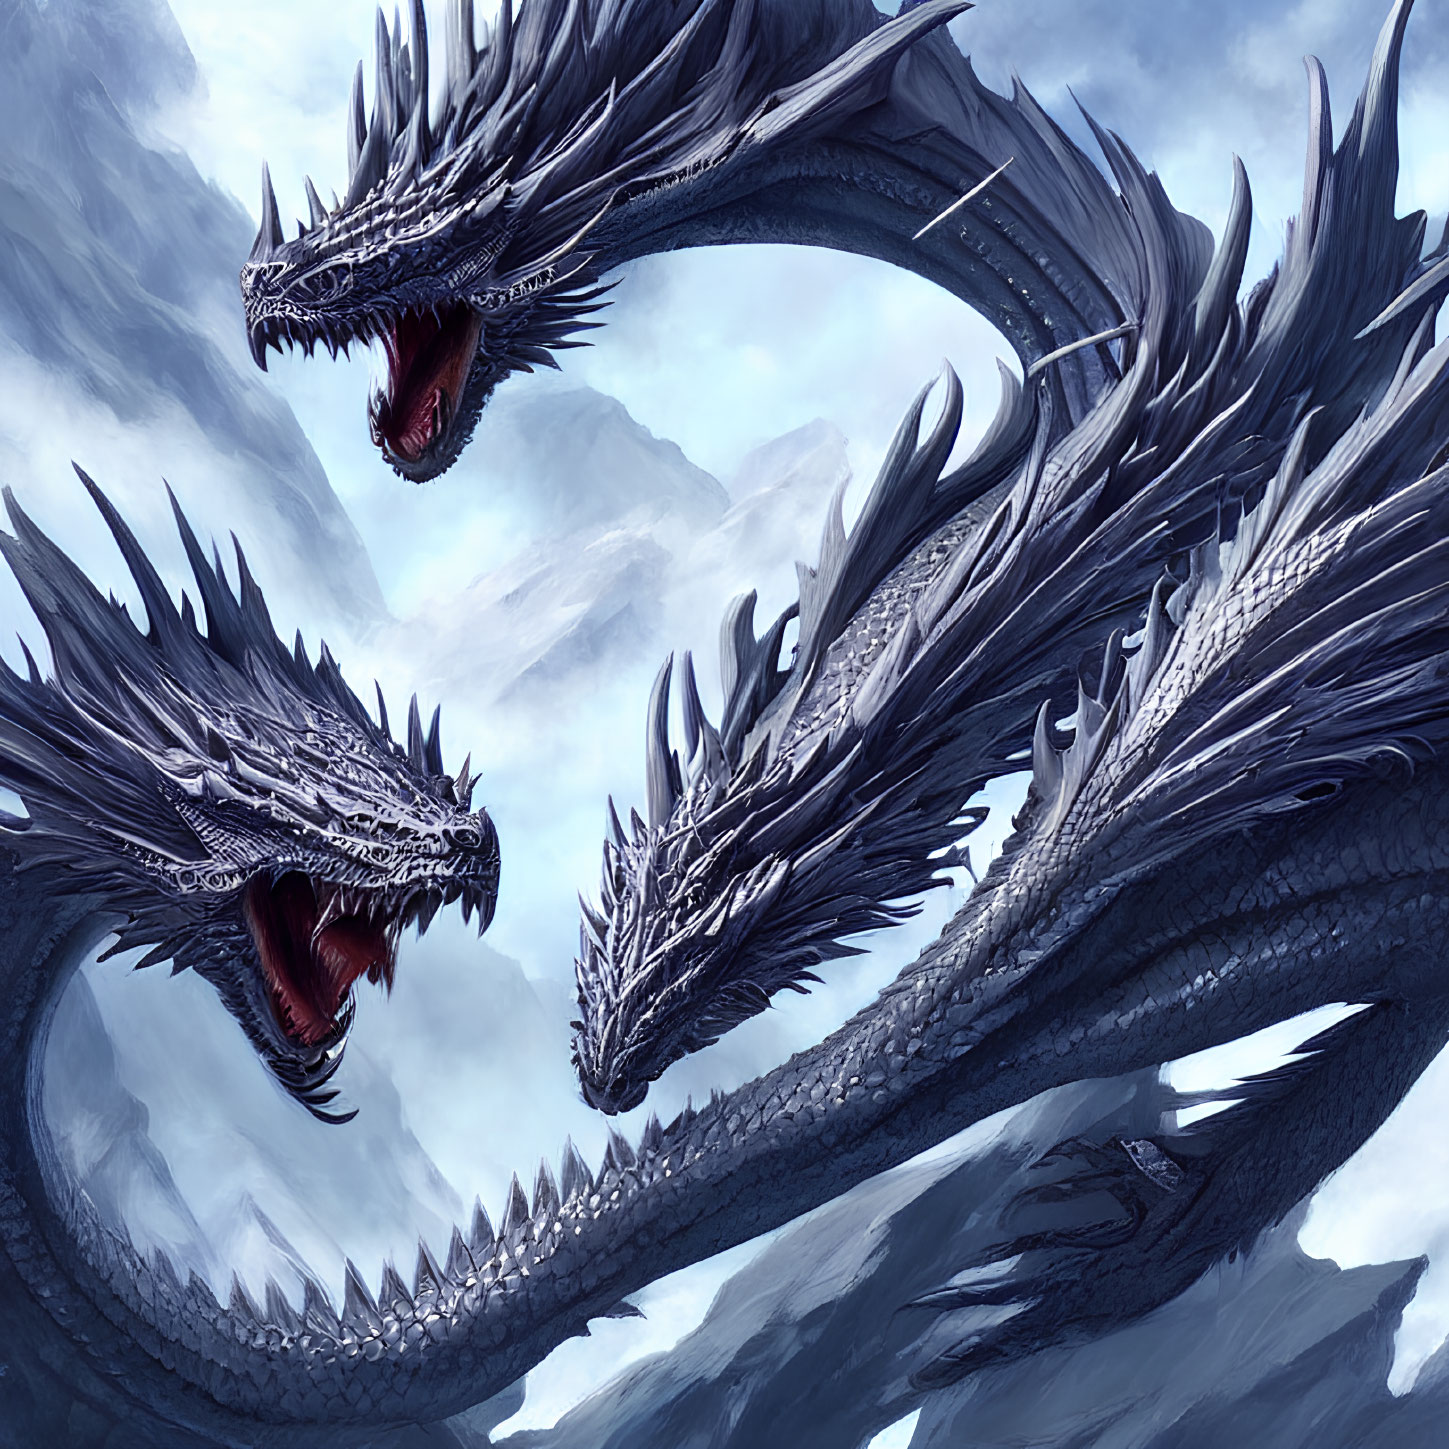 Three intricate scaled dragons in misty mountain backdrop